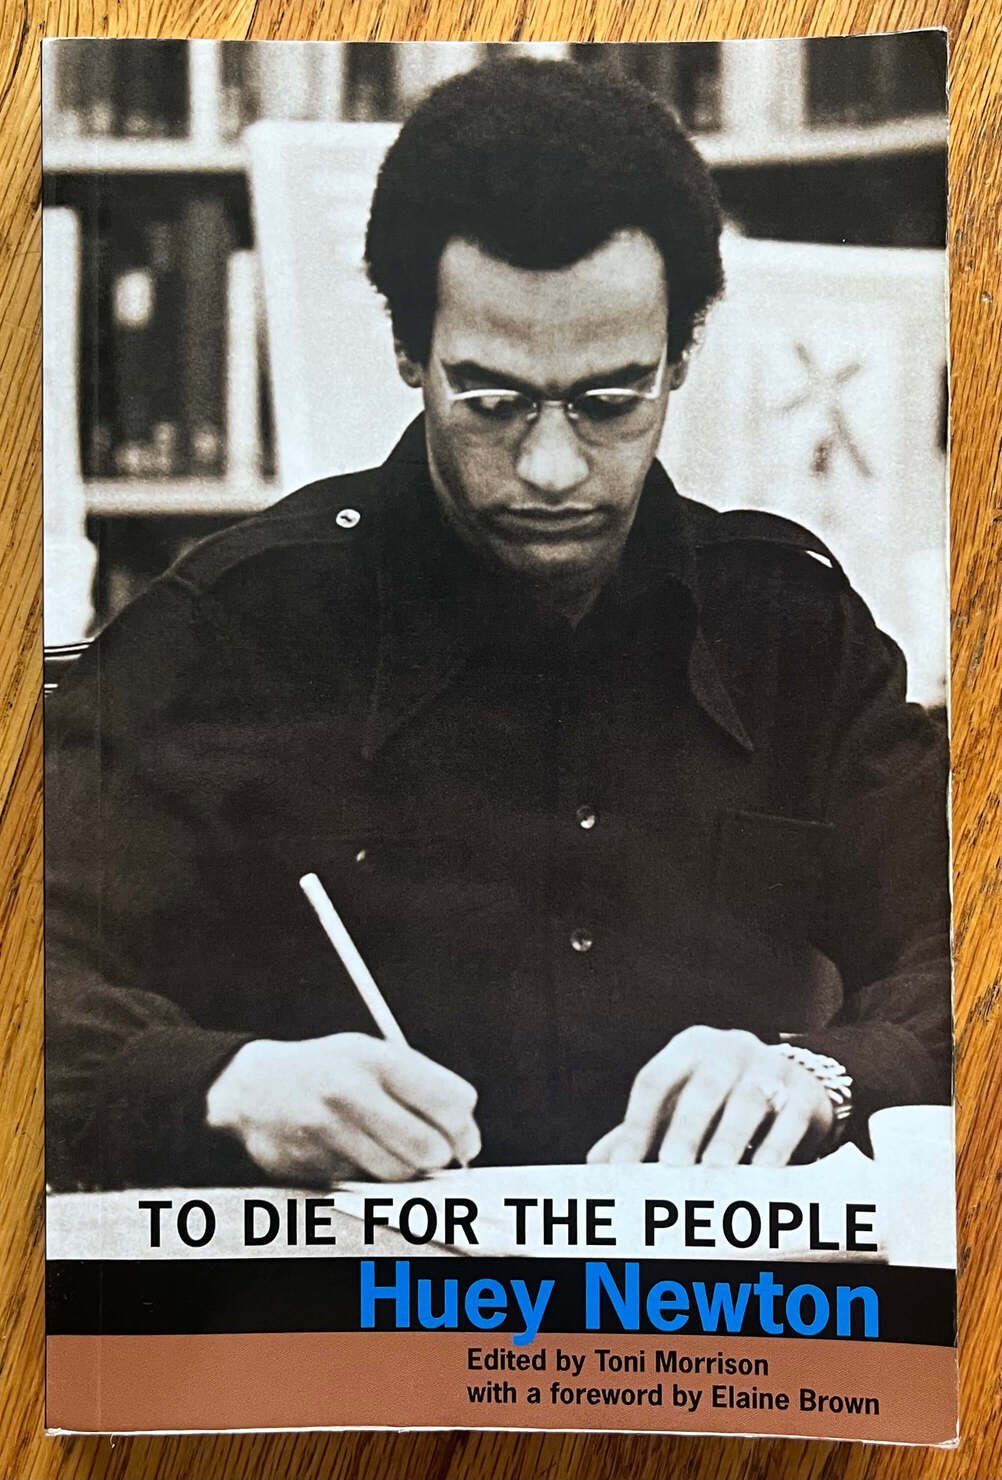 “To Die for the People” by Huey Newton. Edited by Toni Morrison with a foreword by Elaine Brown.